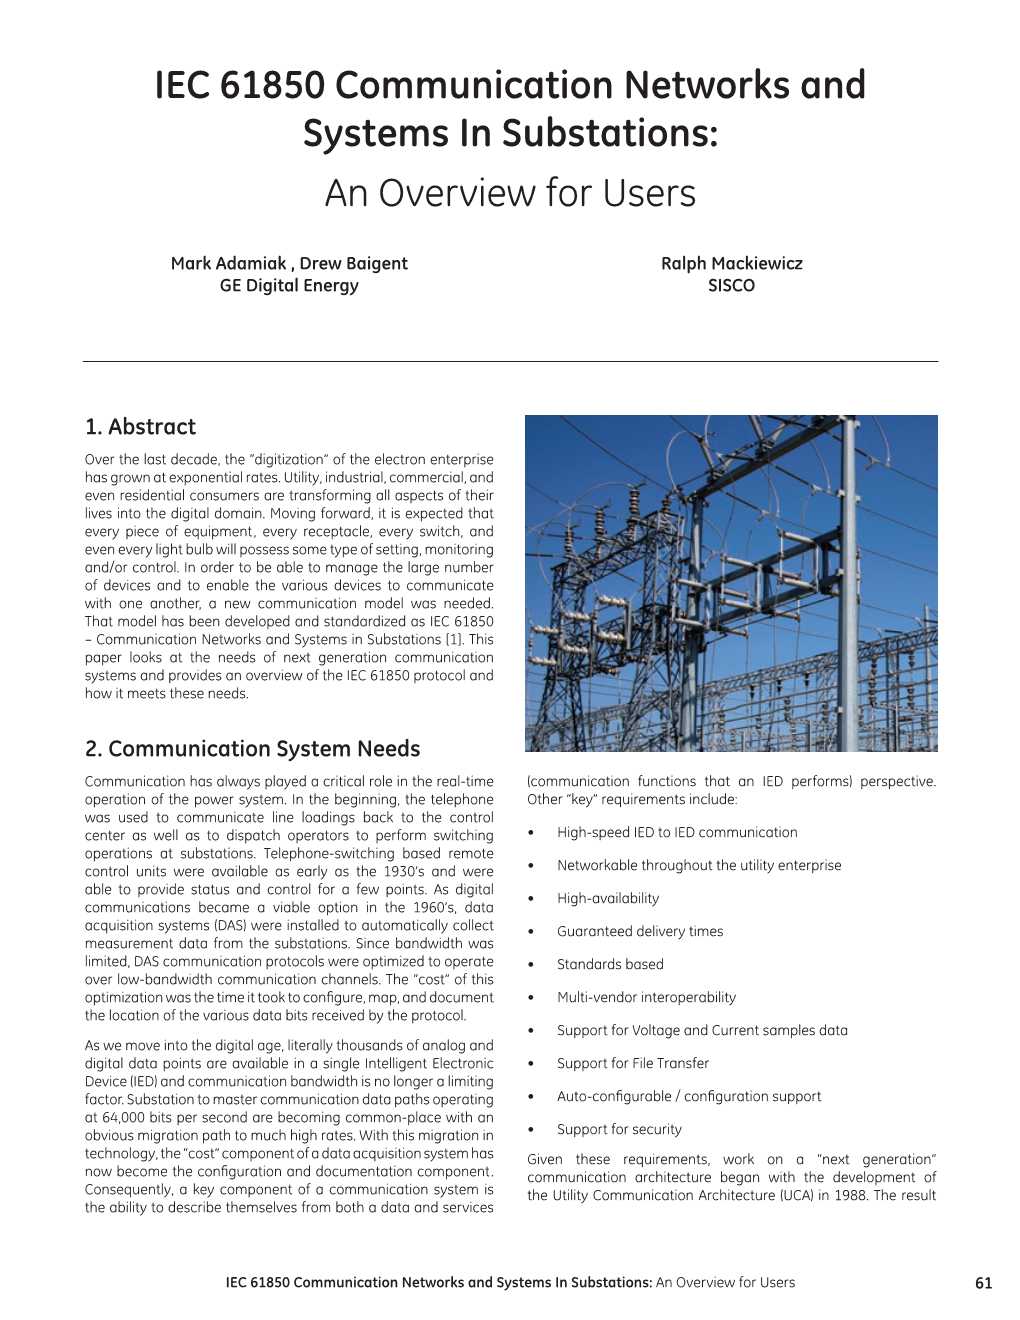 IEC 61850 Communication Networks and Systems in Substations: an Overview for Users